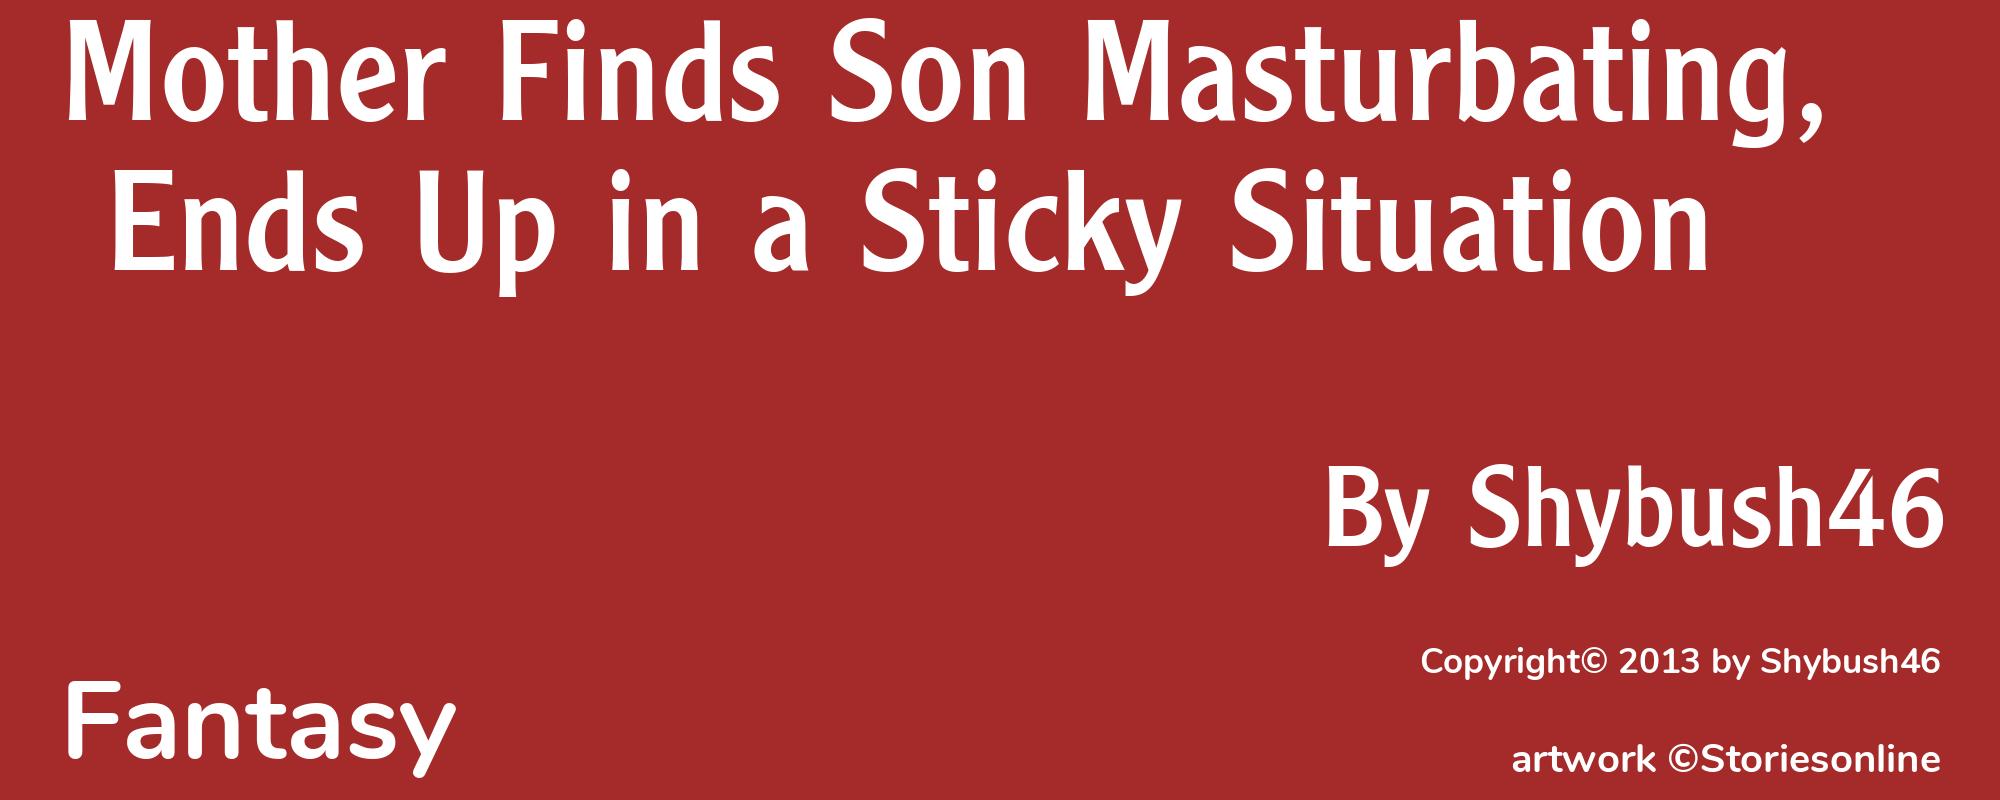 Mother Finds Son Masturbating, Ends Up in a Sticky Situation - Cover